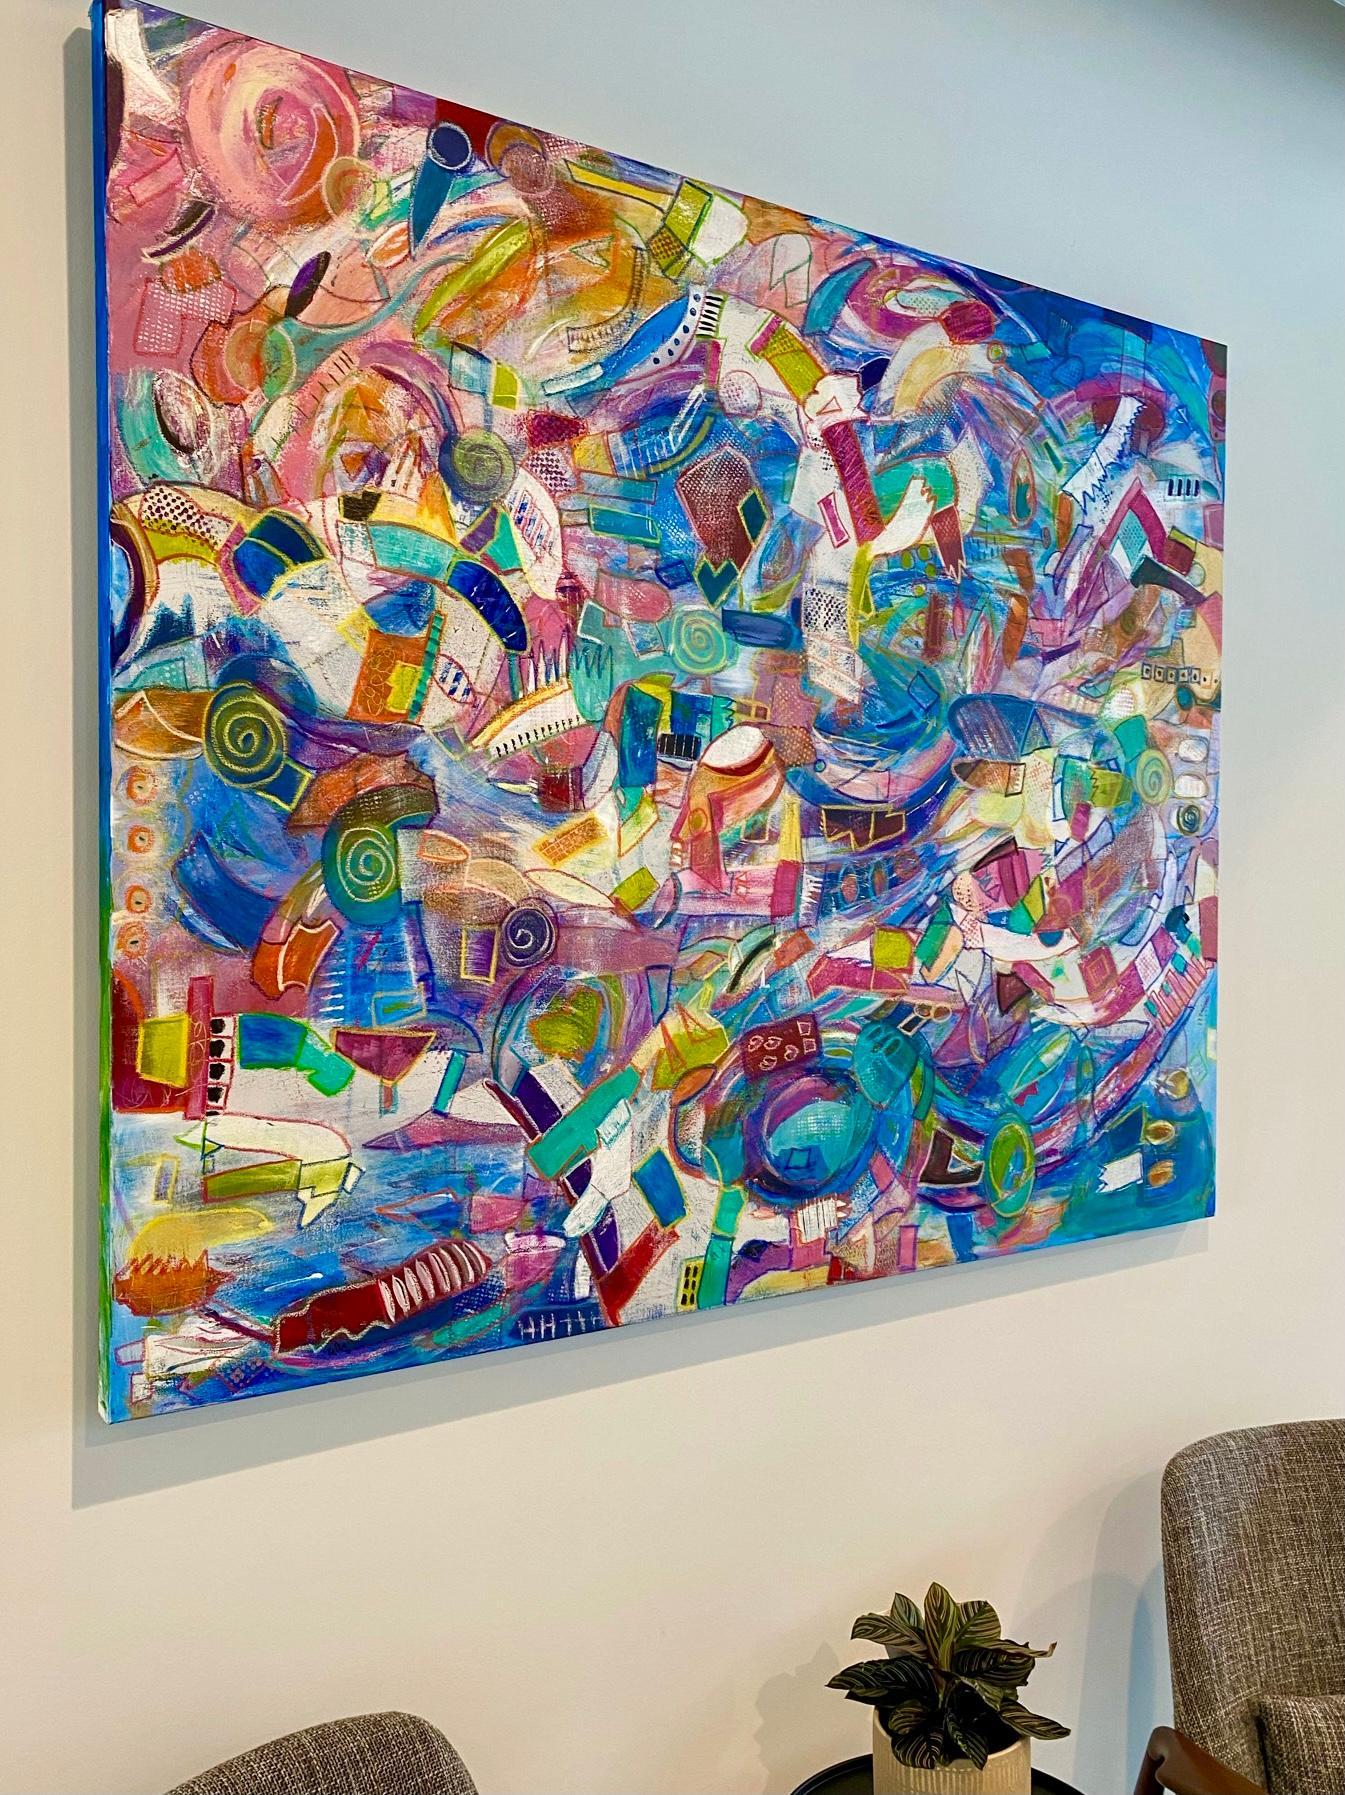 Vortex (Abstract, Gestural, Pink, Blue, Green, White, Red, Yellow, Orange) - Painting by Kelley Carman